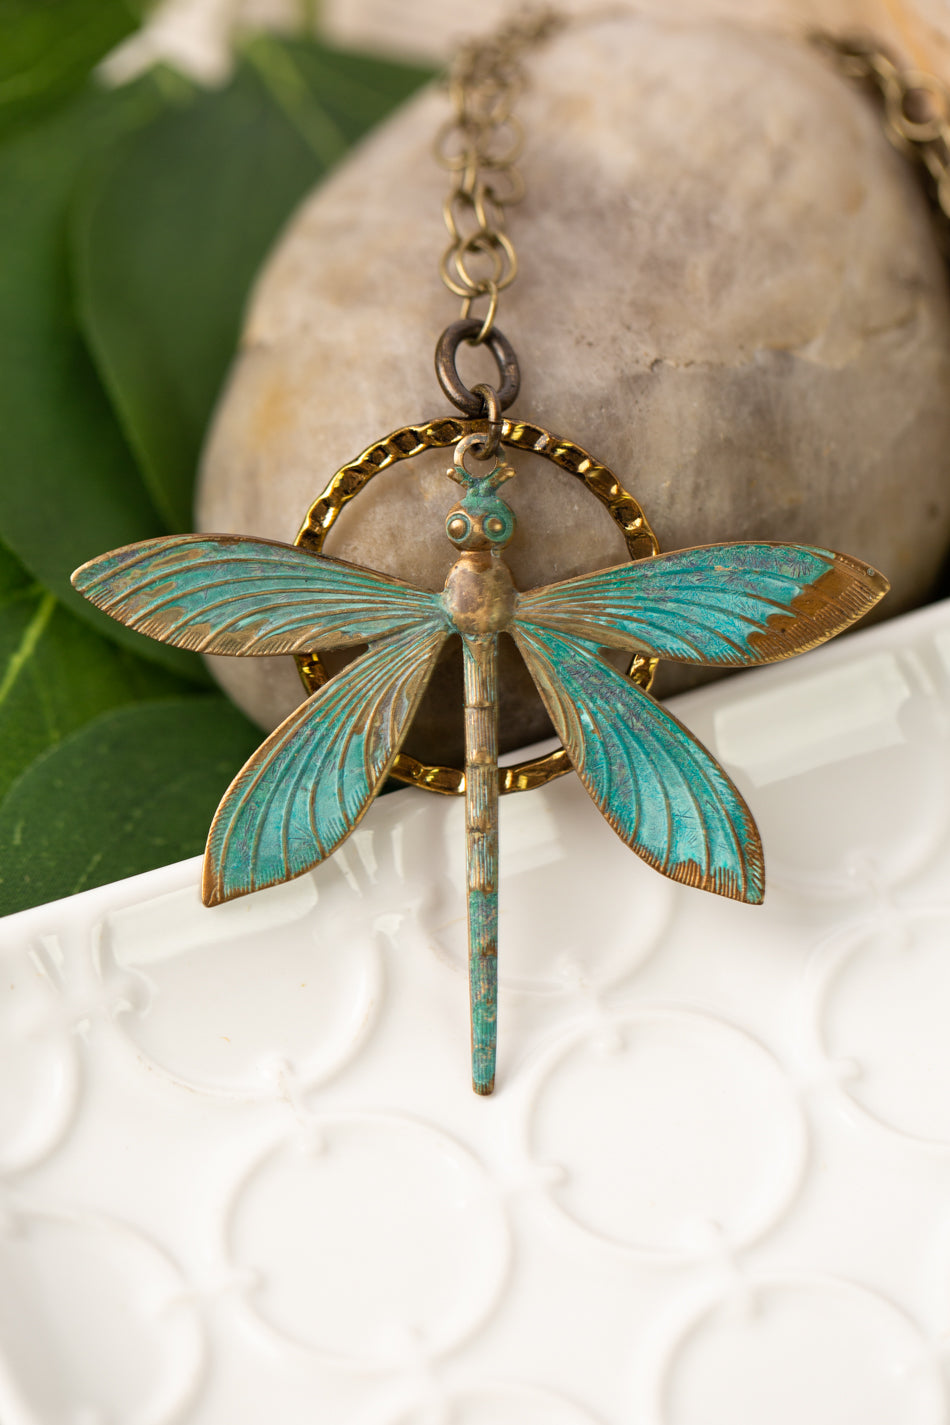 Gold dragonfly necklace - bug necklace - dragonfly pendant necklace